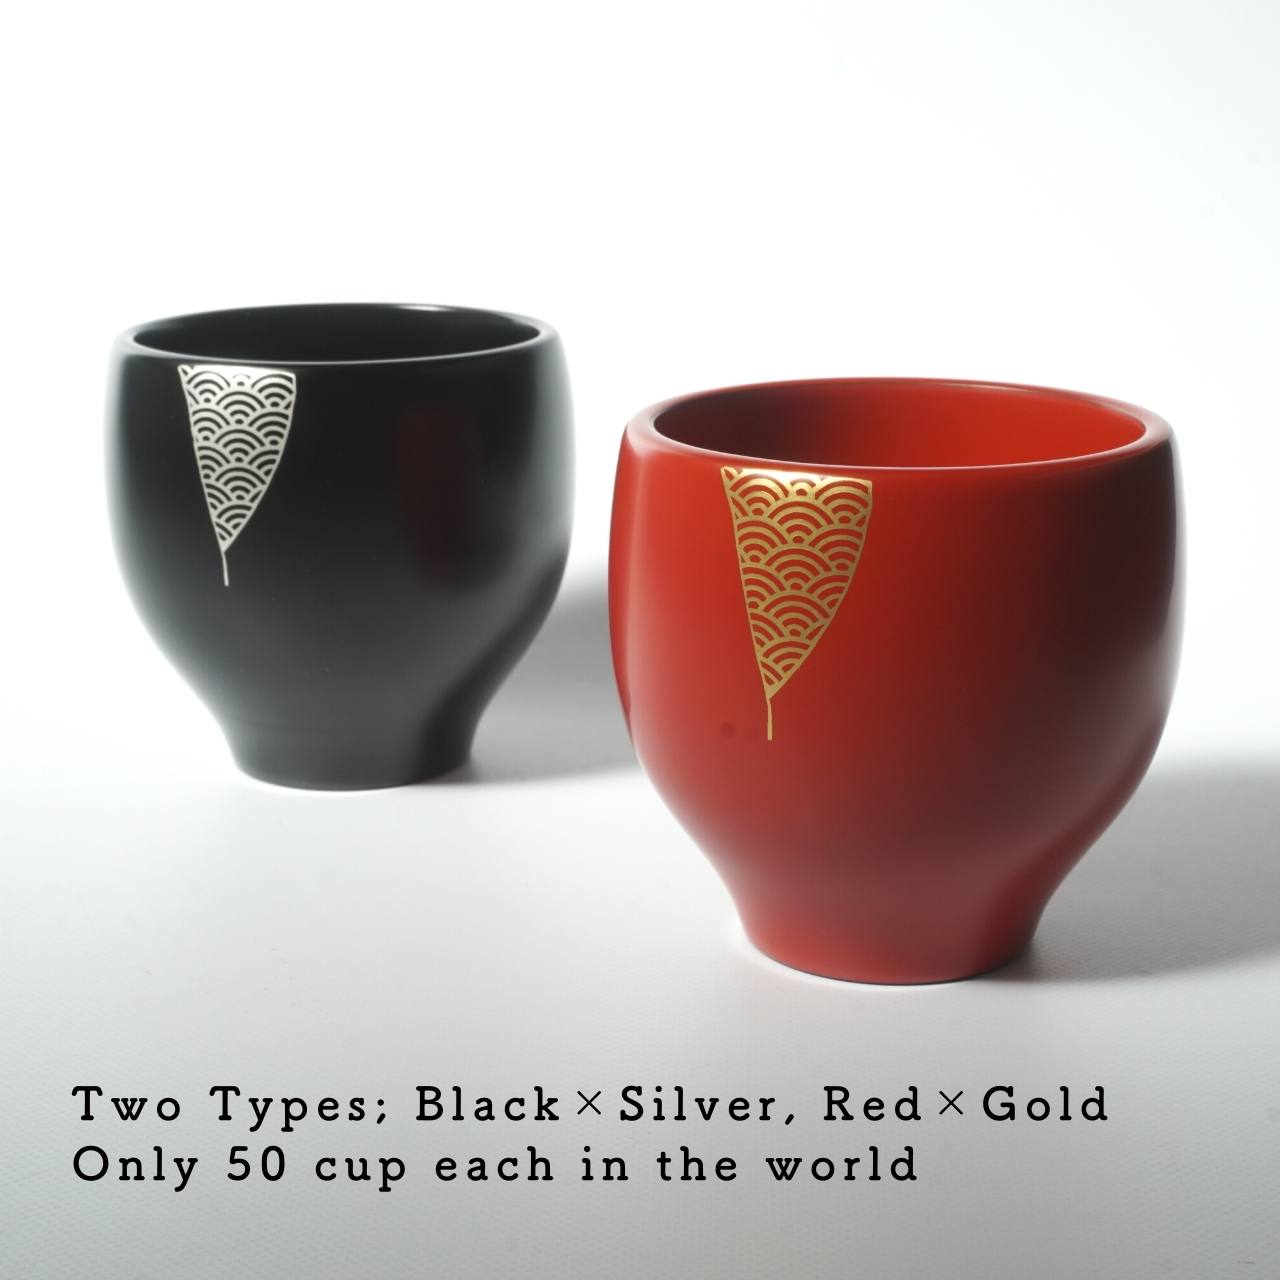 Yobitsugi Cup - Black Lacquered Cup Handcrafted in Japan